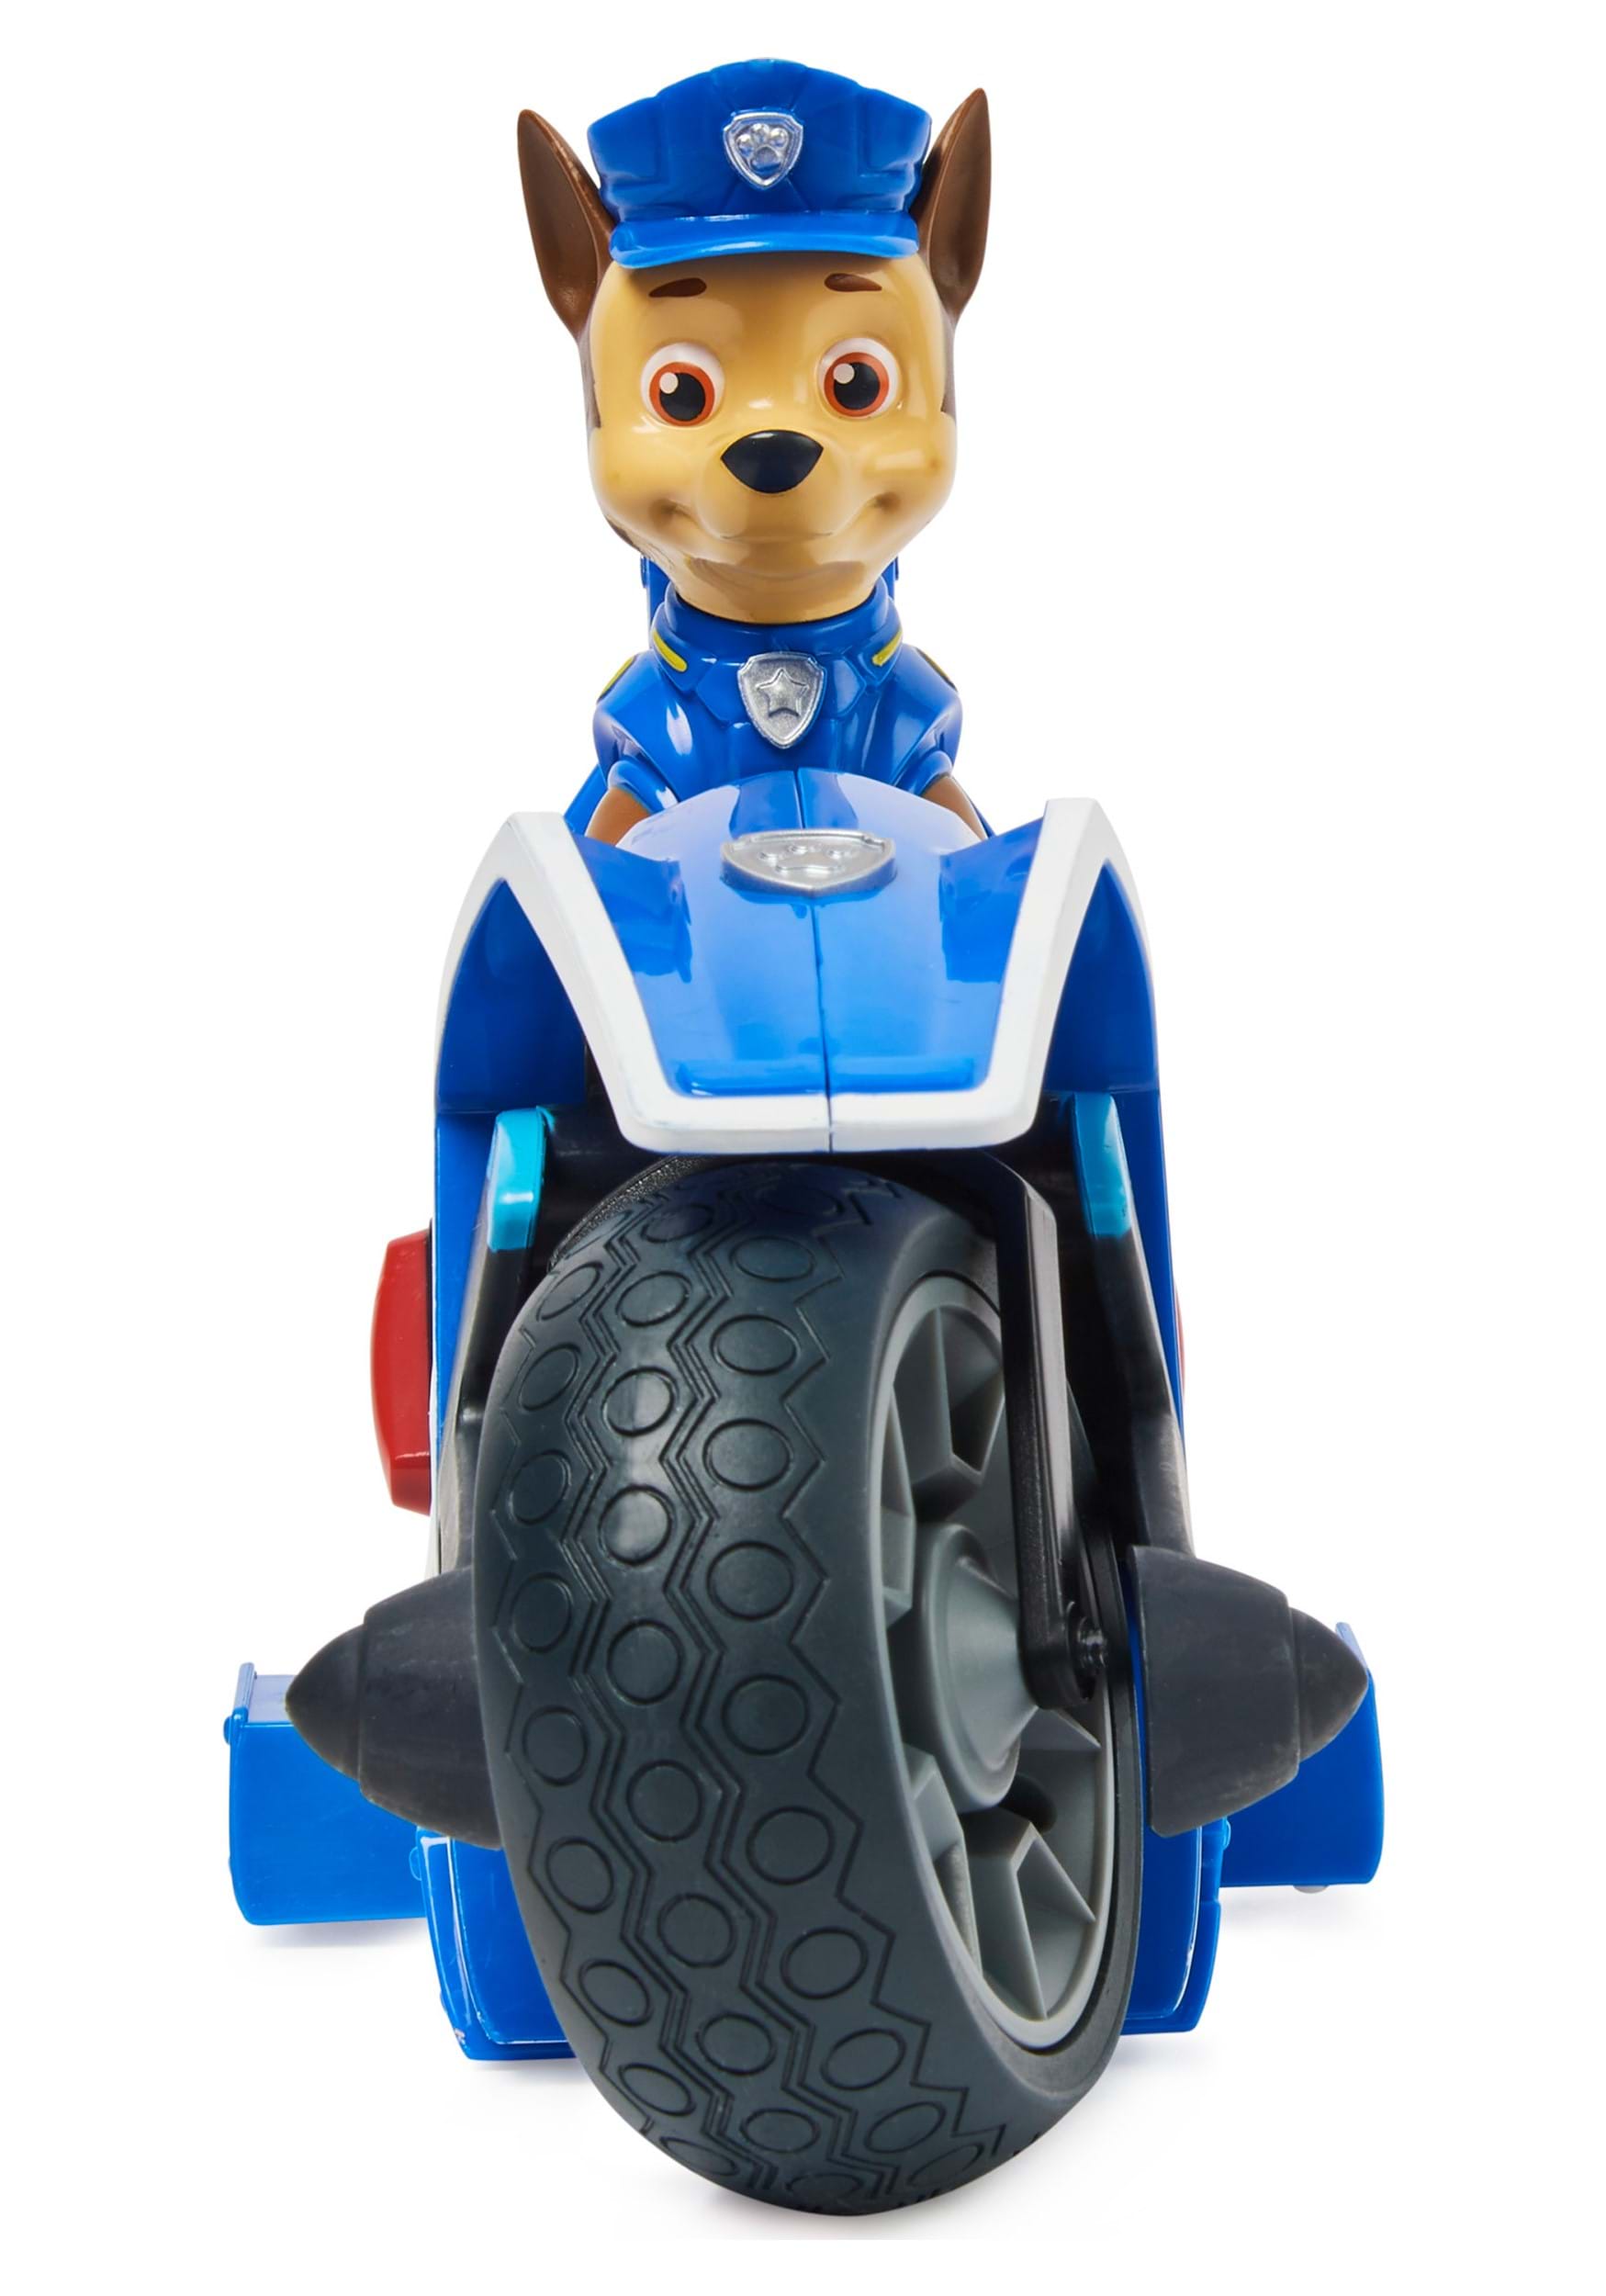 Paw Patrol Chase RC Motorcycle